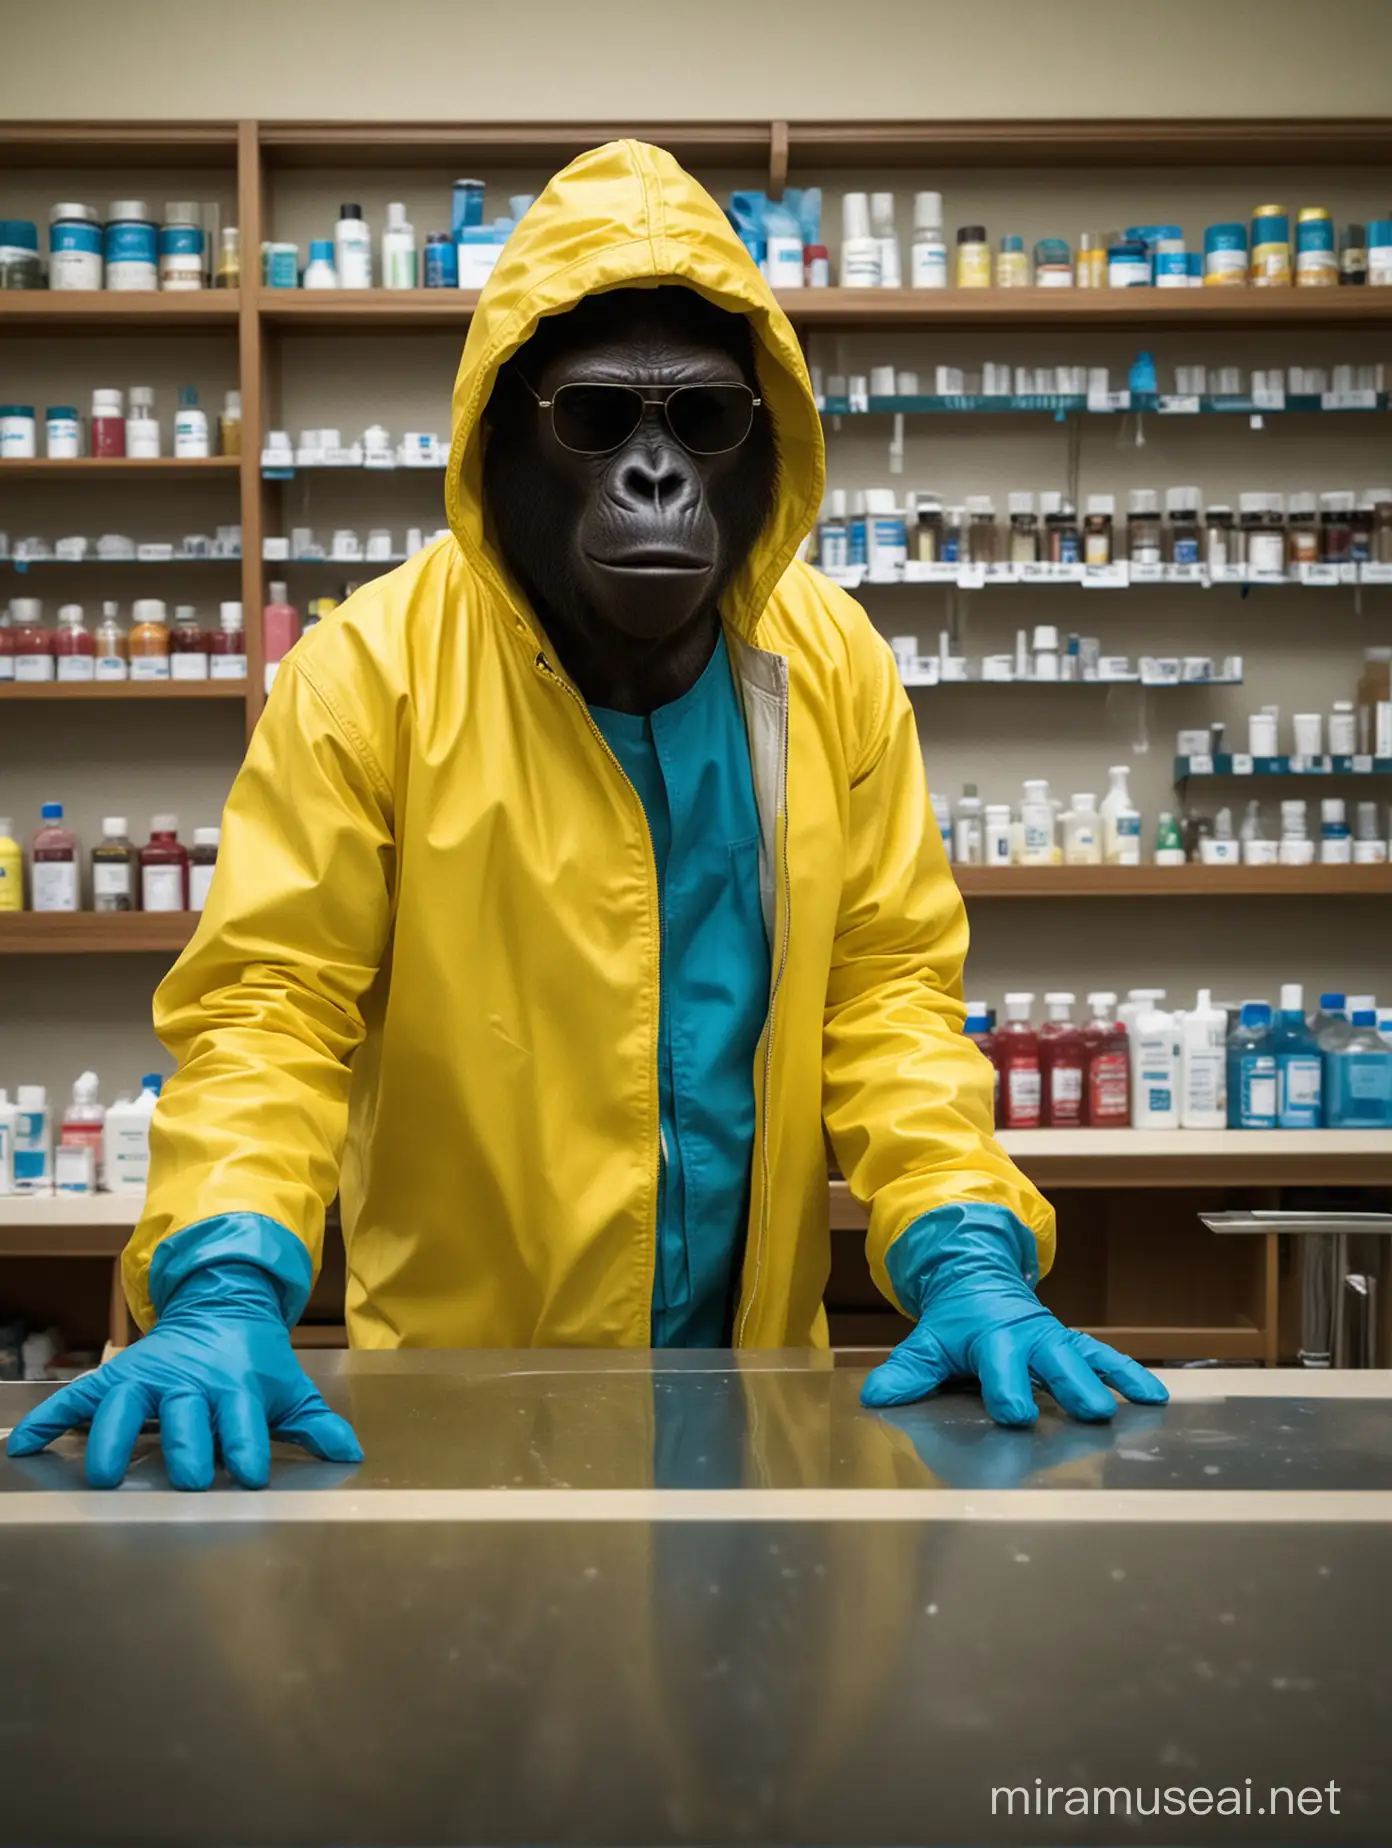 Breaking Bad Style Gorilla Pharmacist Surrounded by Medication